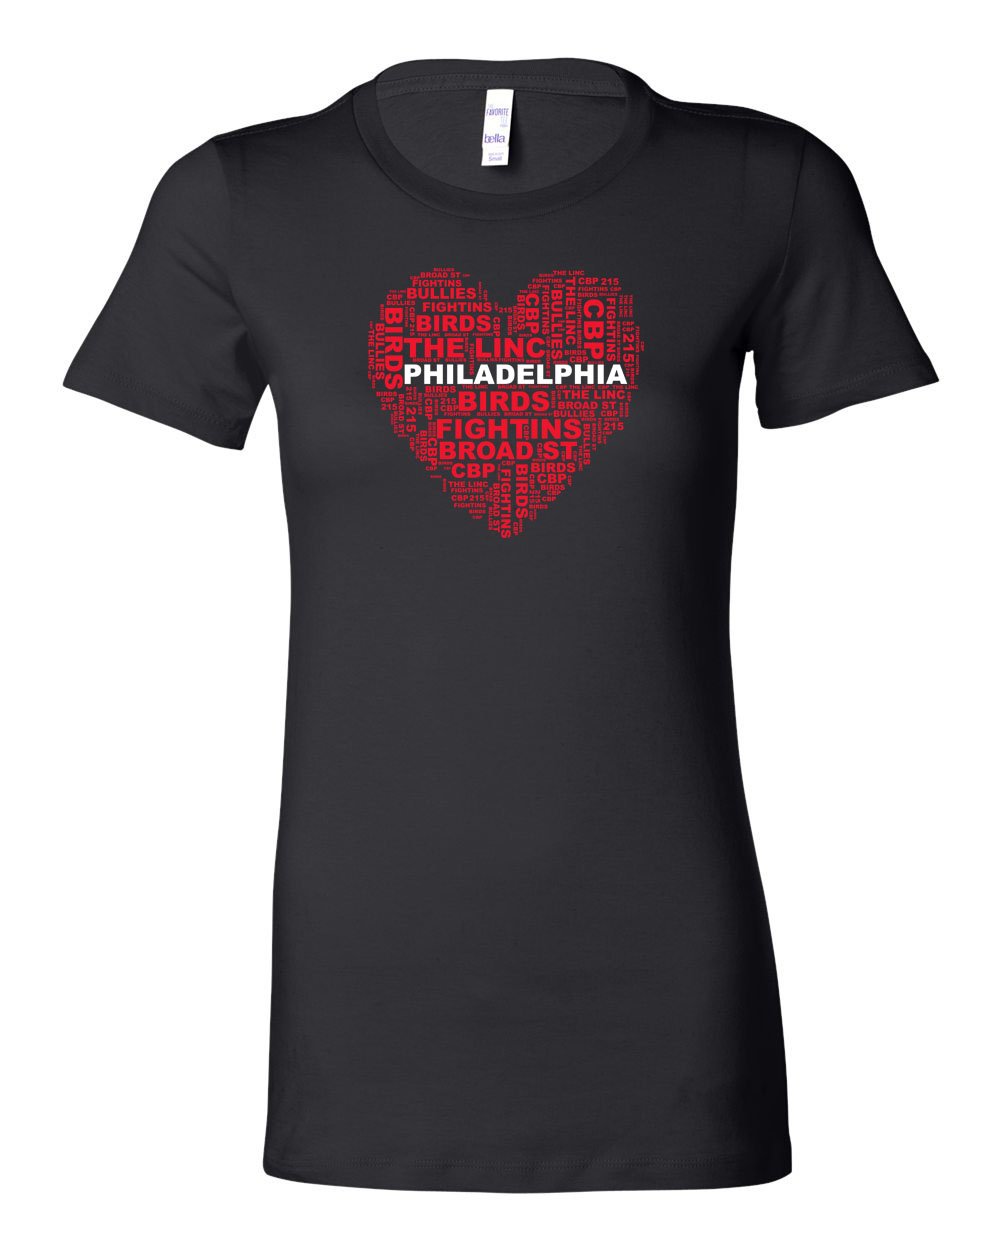 Philly Heart LADIES Junior-Fit T-Shirt